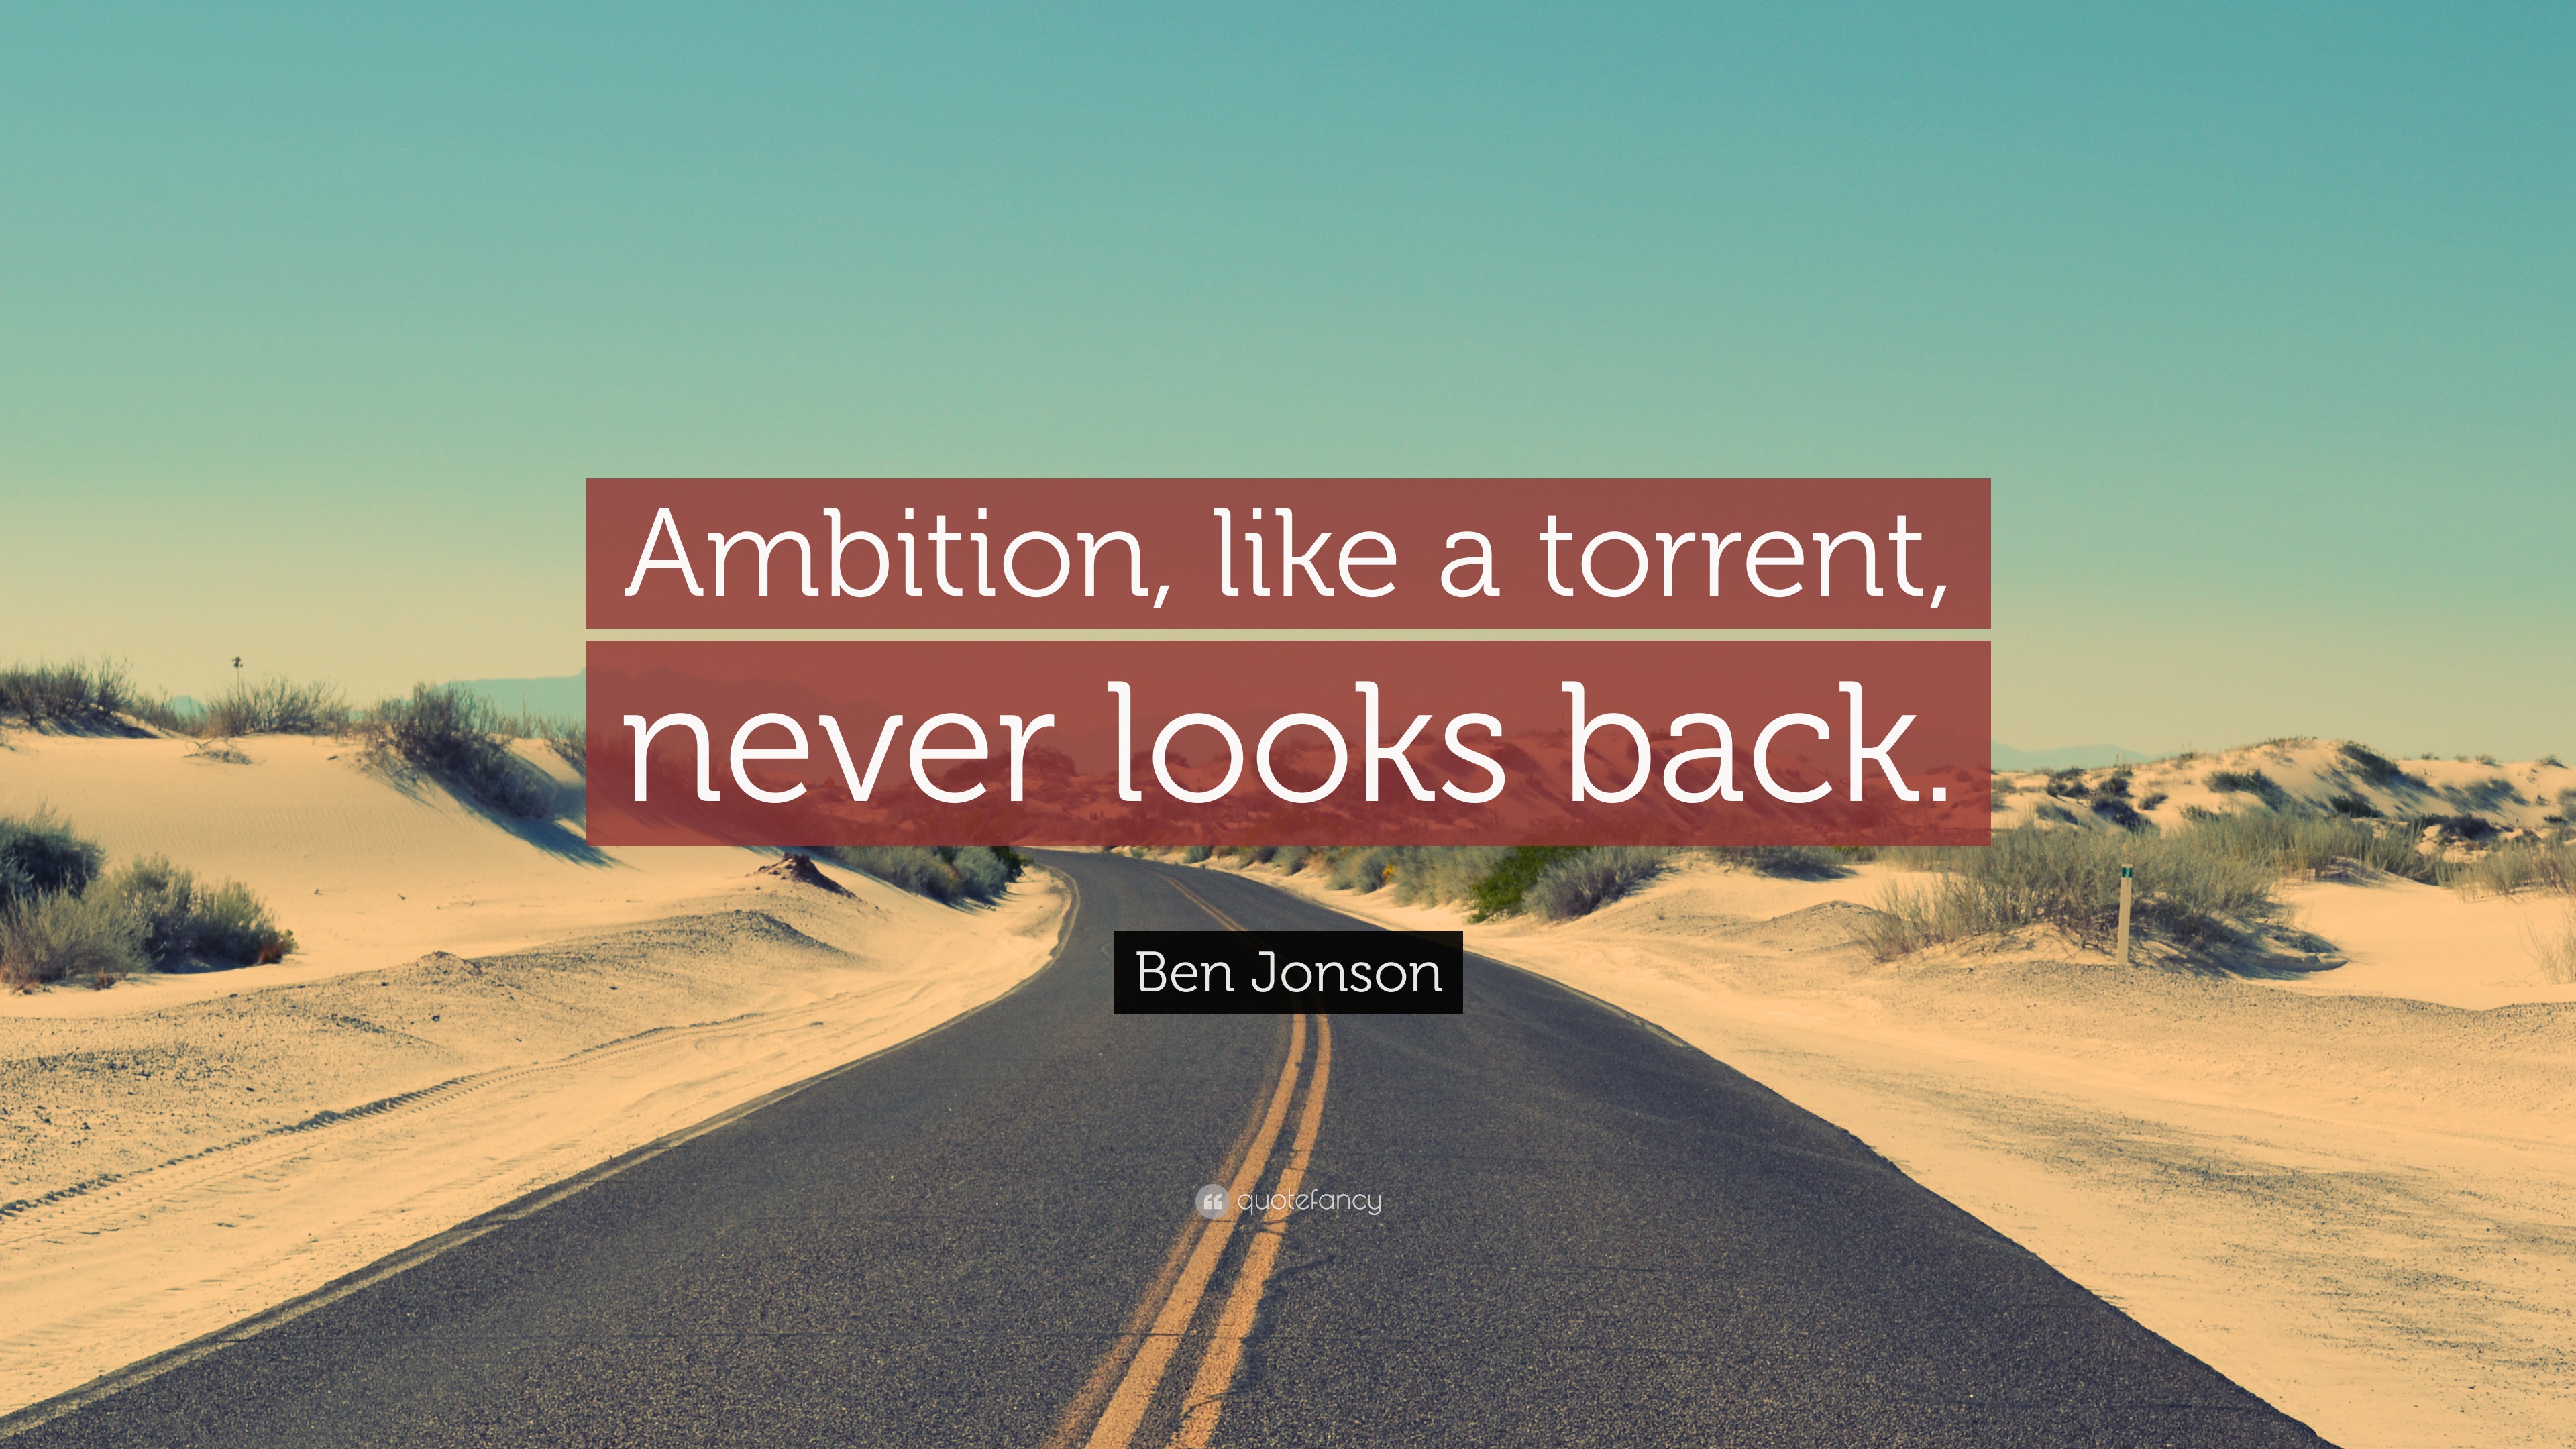 Ben Jonson Quote: “Ambition, like a torrent, never looks back.”